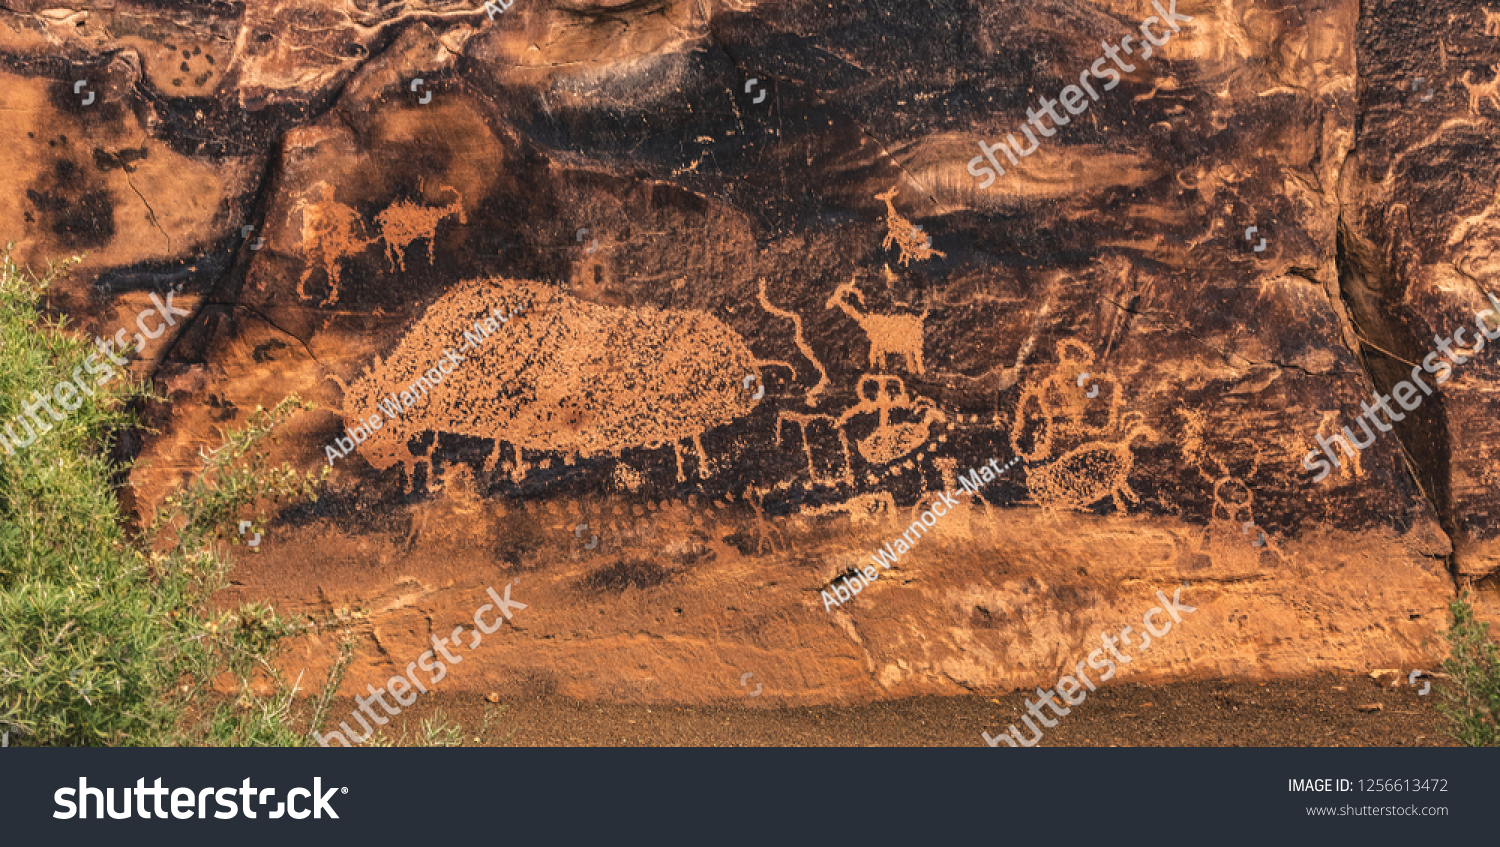 The "Big Buffalo" petroglyph rock art panel in Nine Mile Canyon, near Price, Utah, USA.  Called the "world's longest art gallery," the art was made over 1000+ years by Archaic Fremont and modern Ute. #1256613472